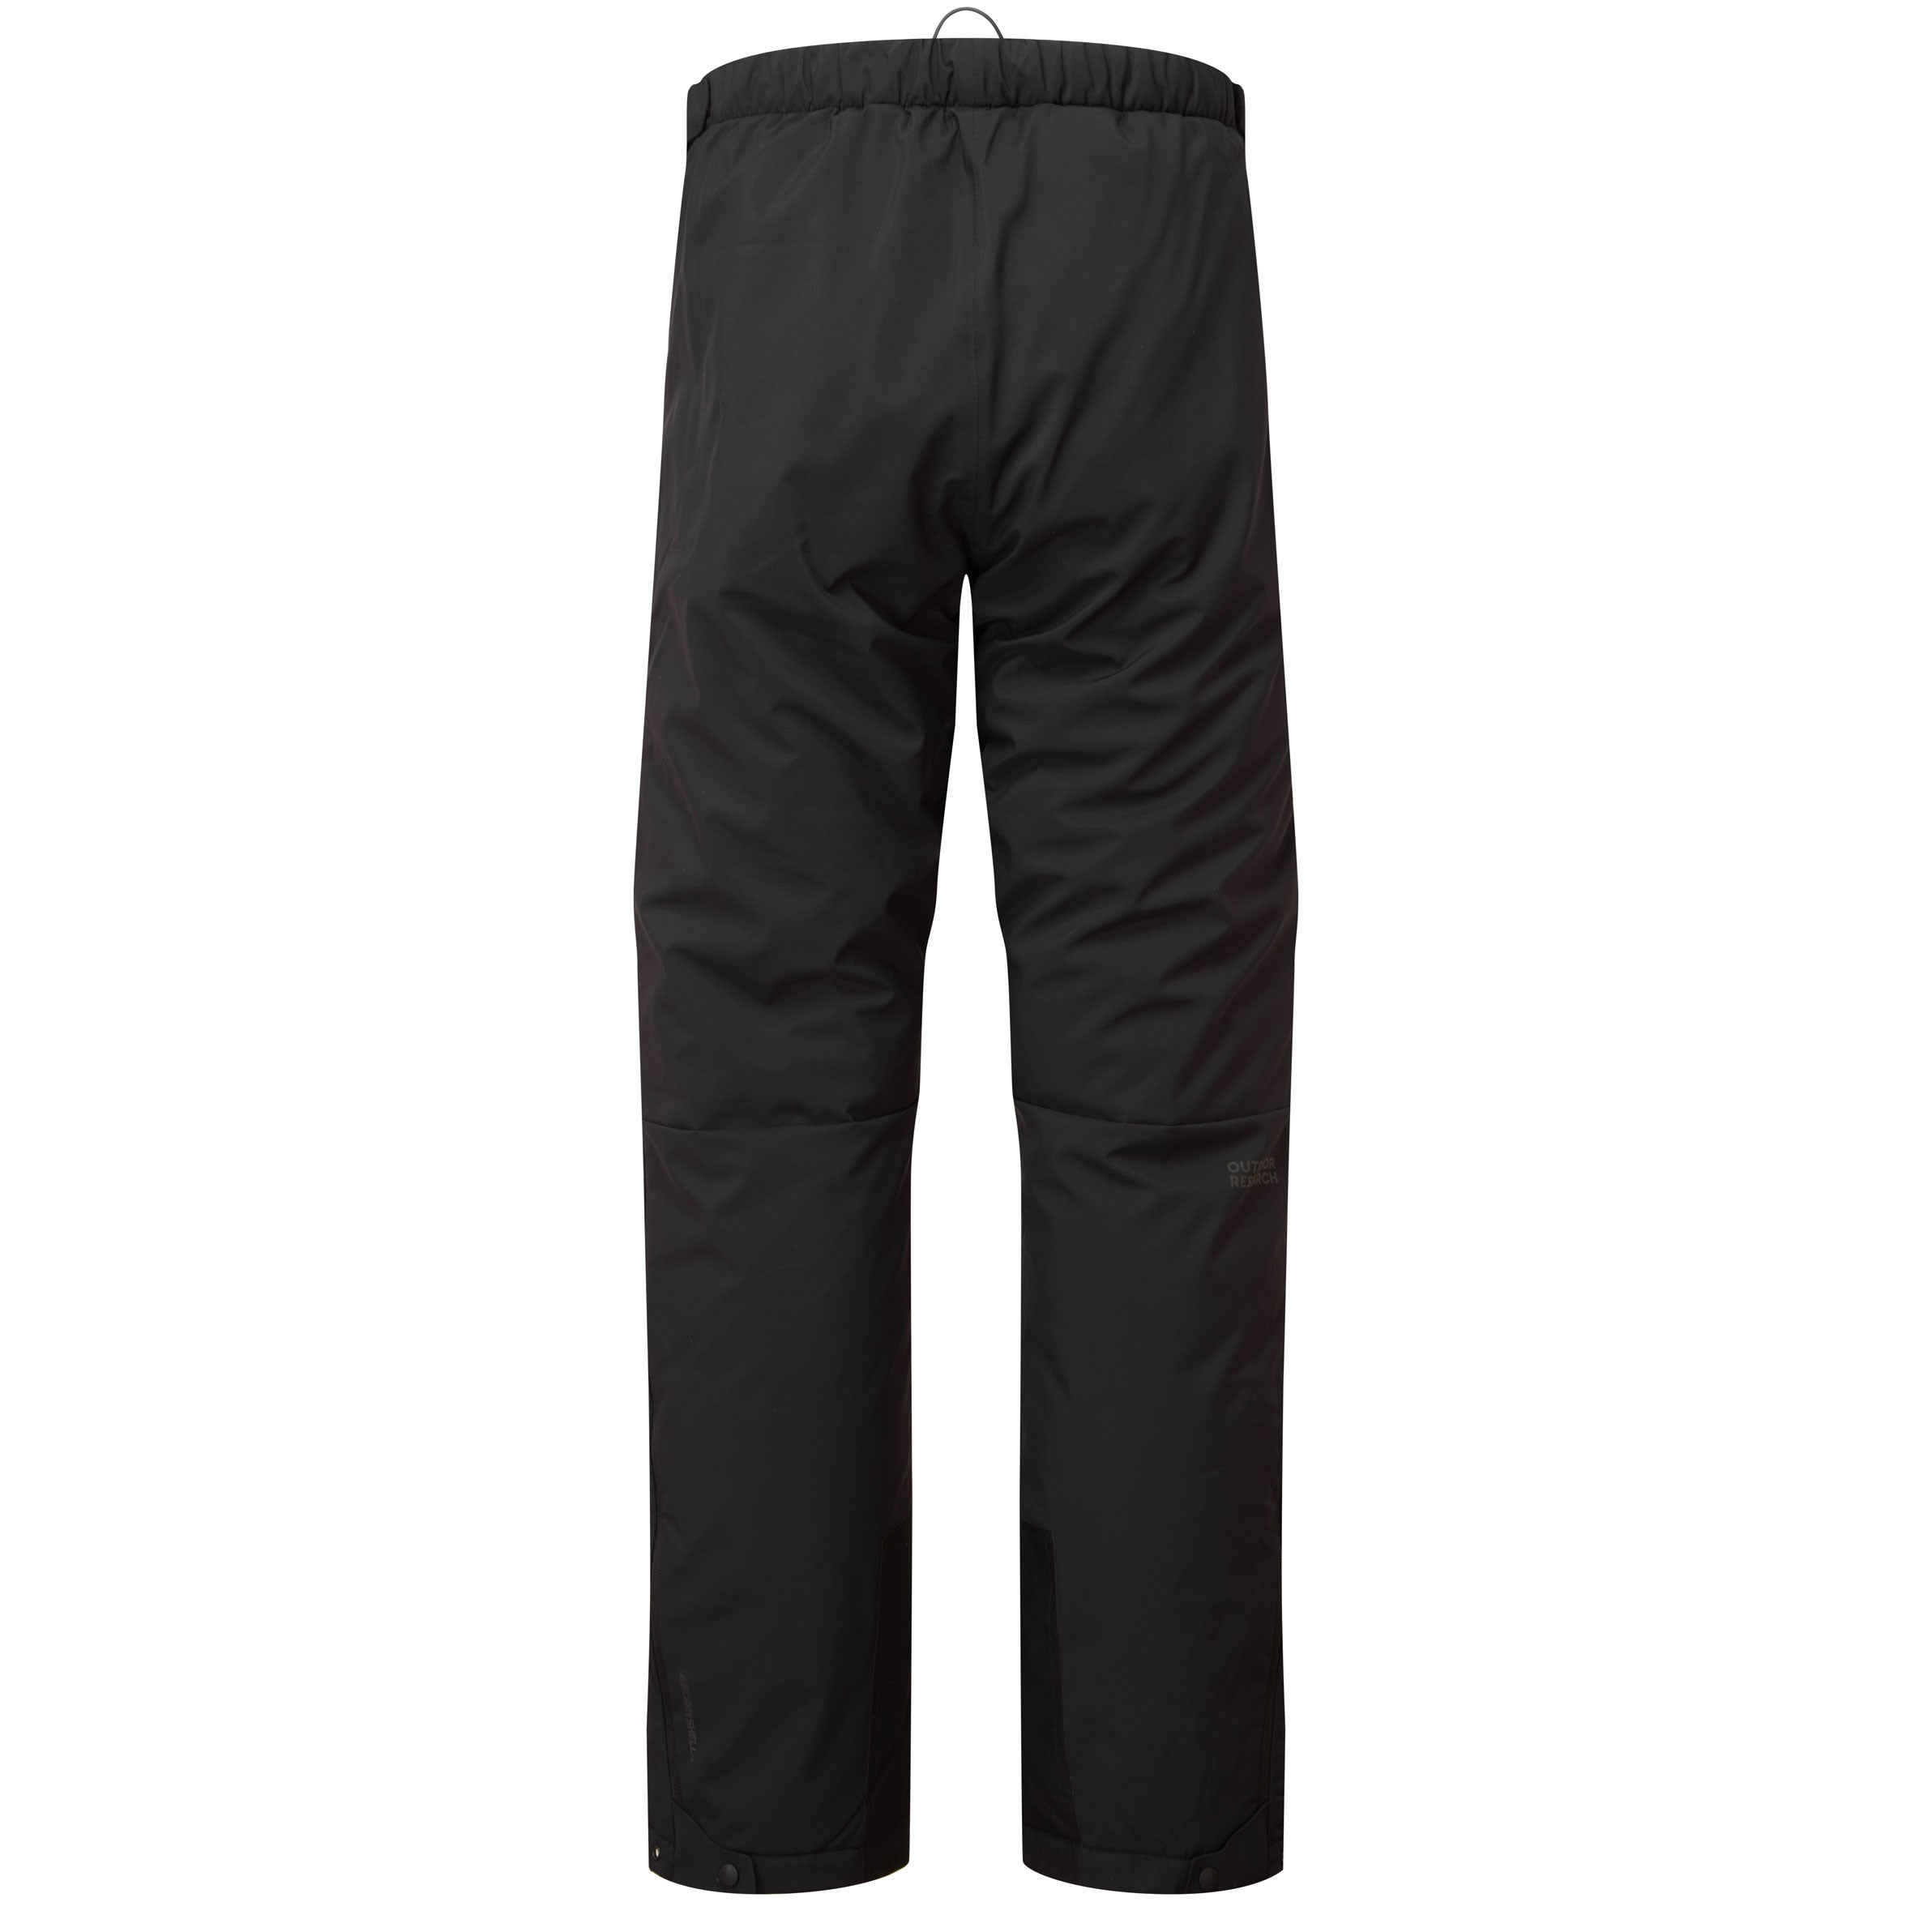 Allies Colossus Pant